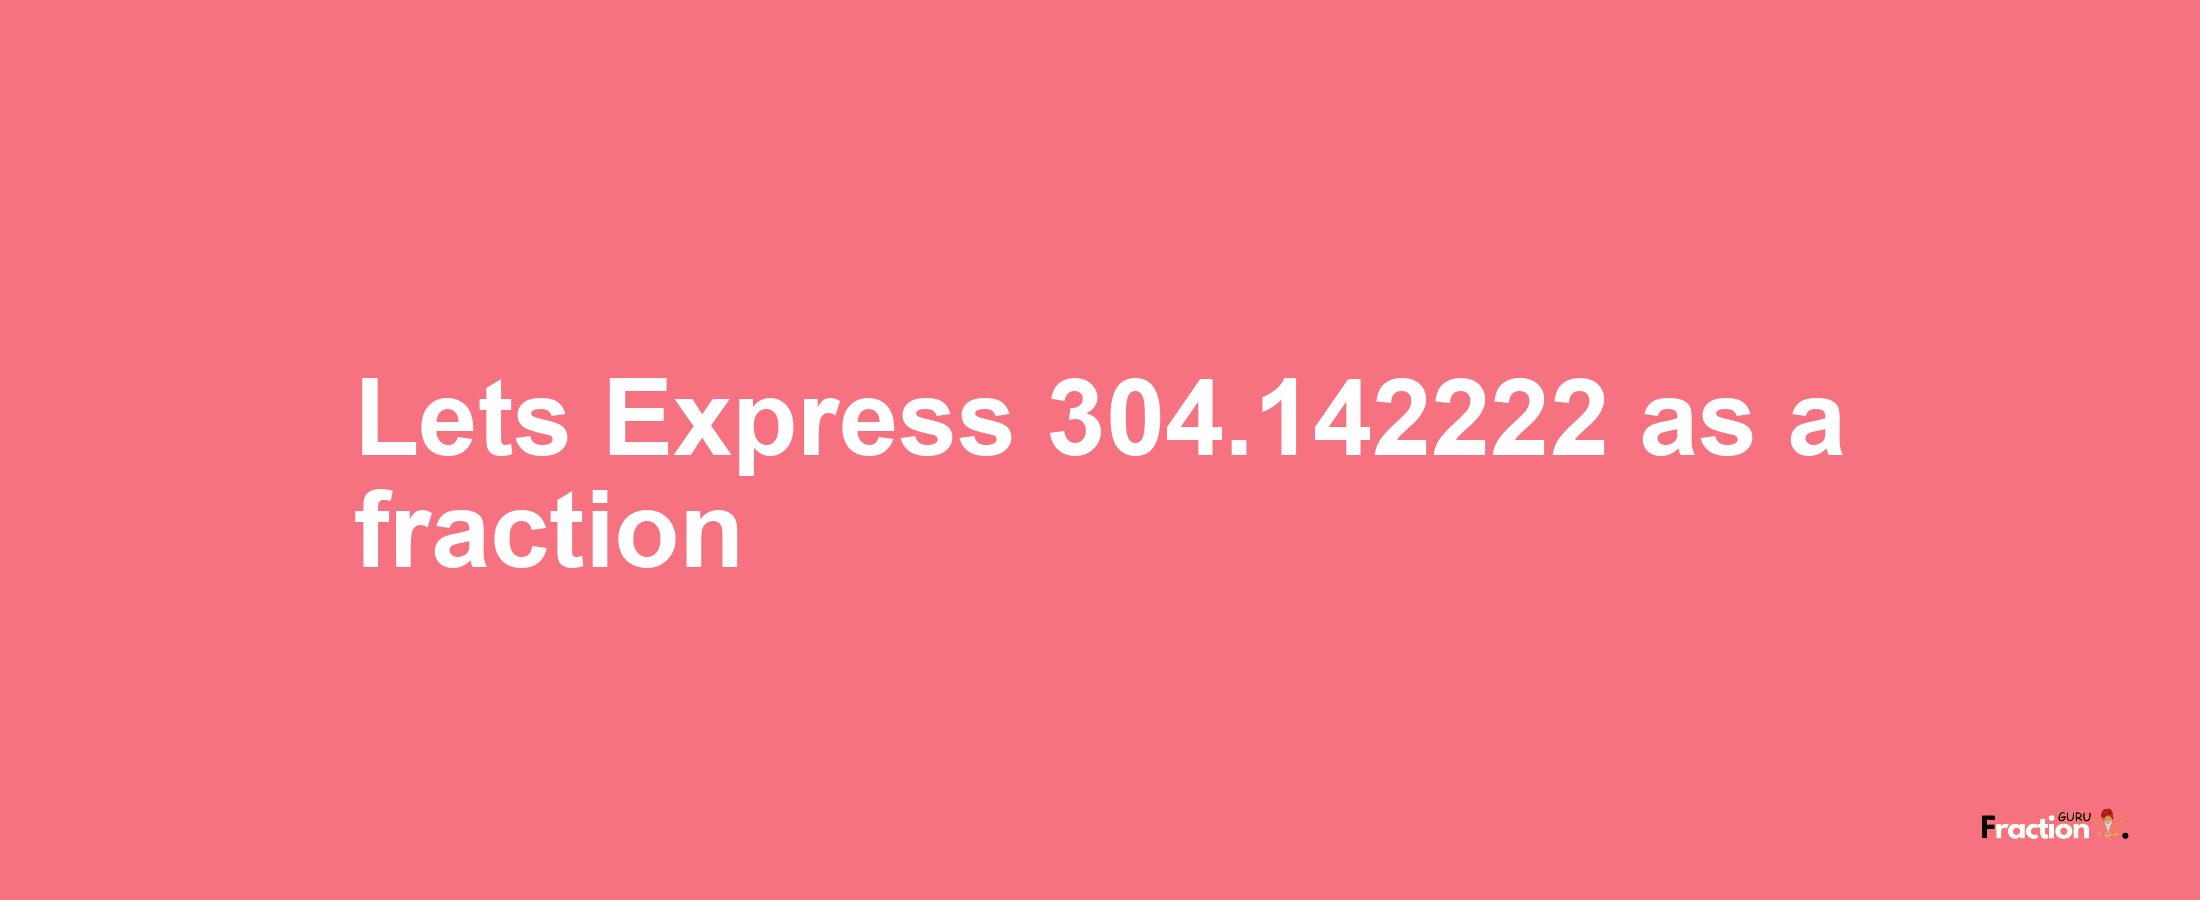 Lets Express 304.142222 as afraction